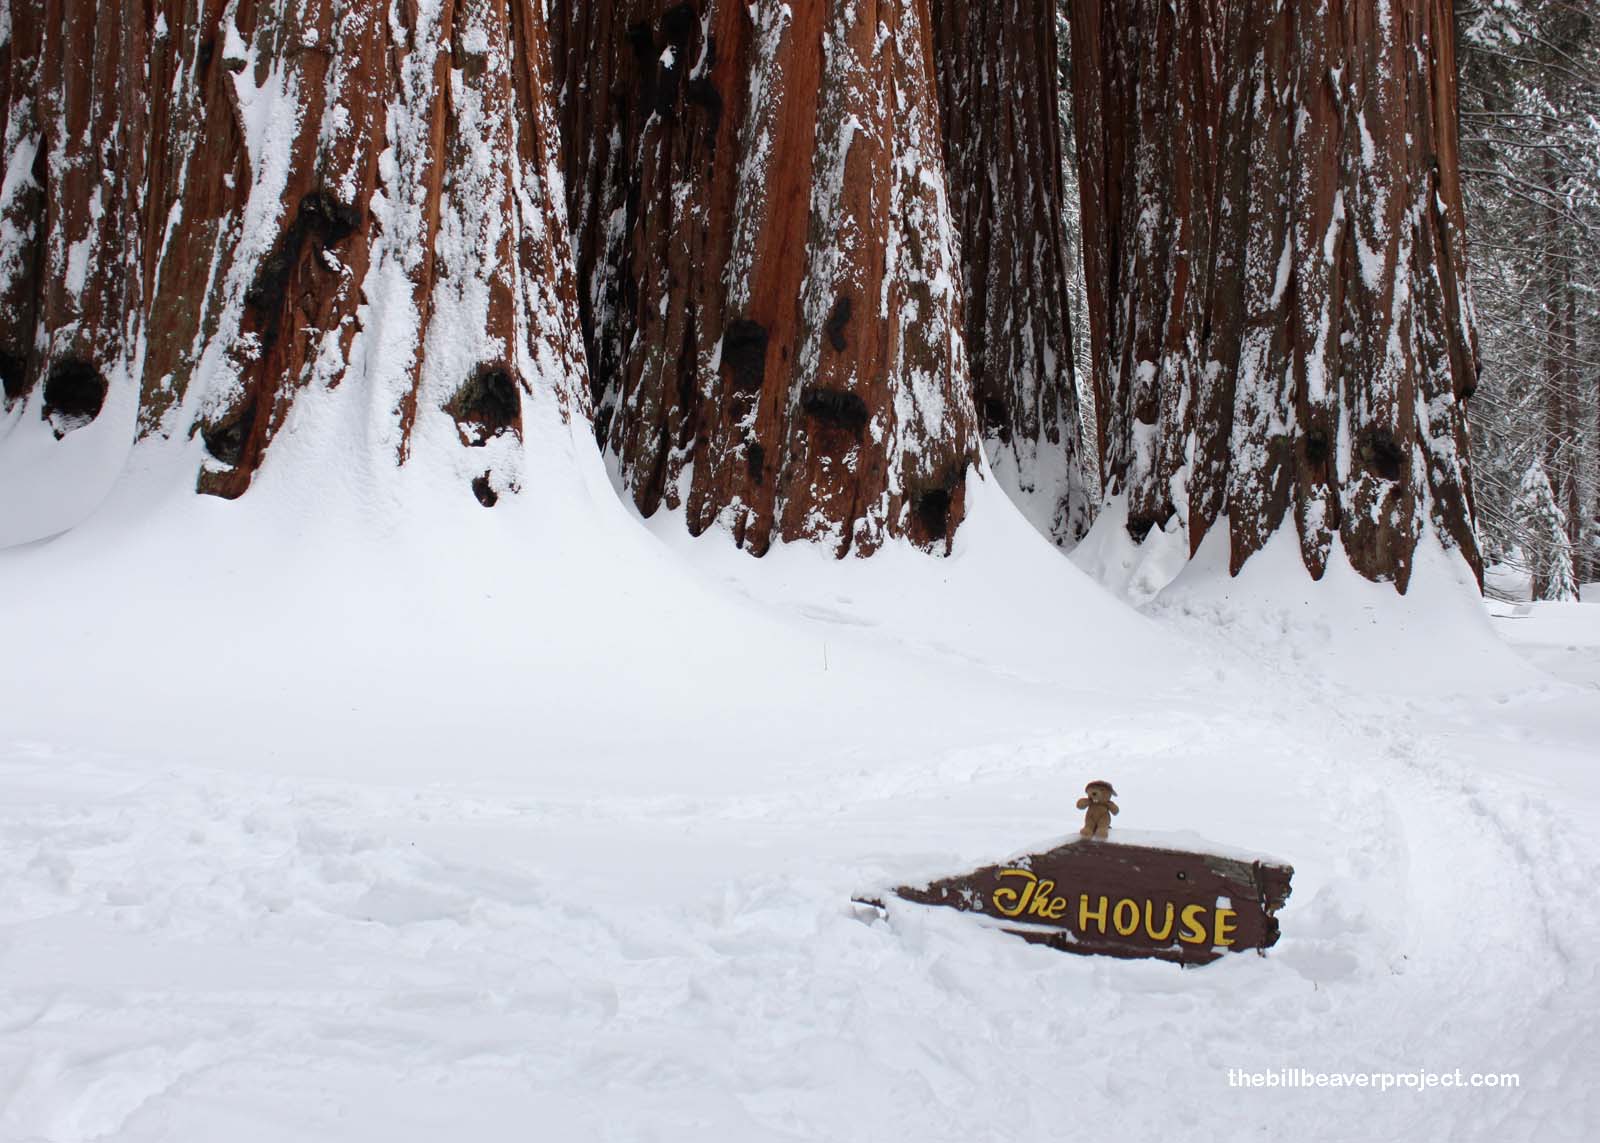 This huge sequoia grove is called The House!